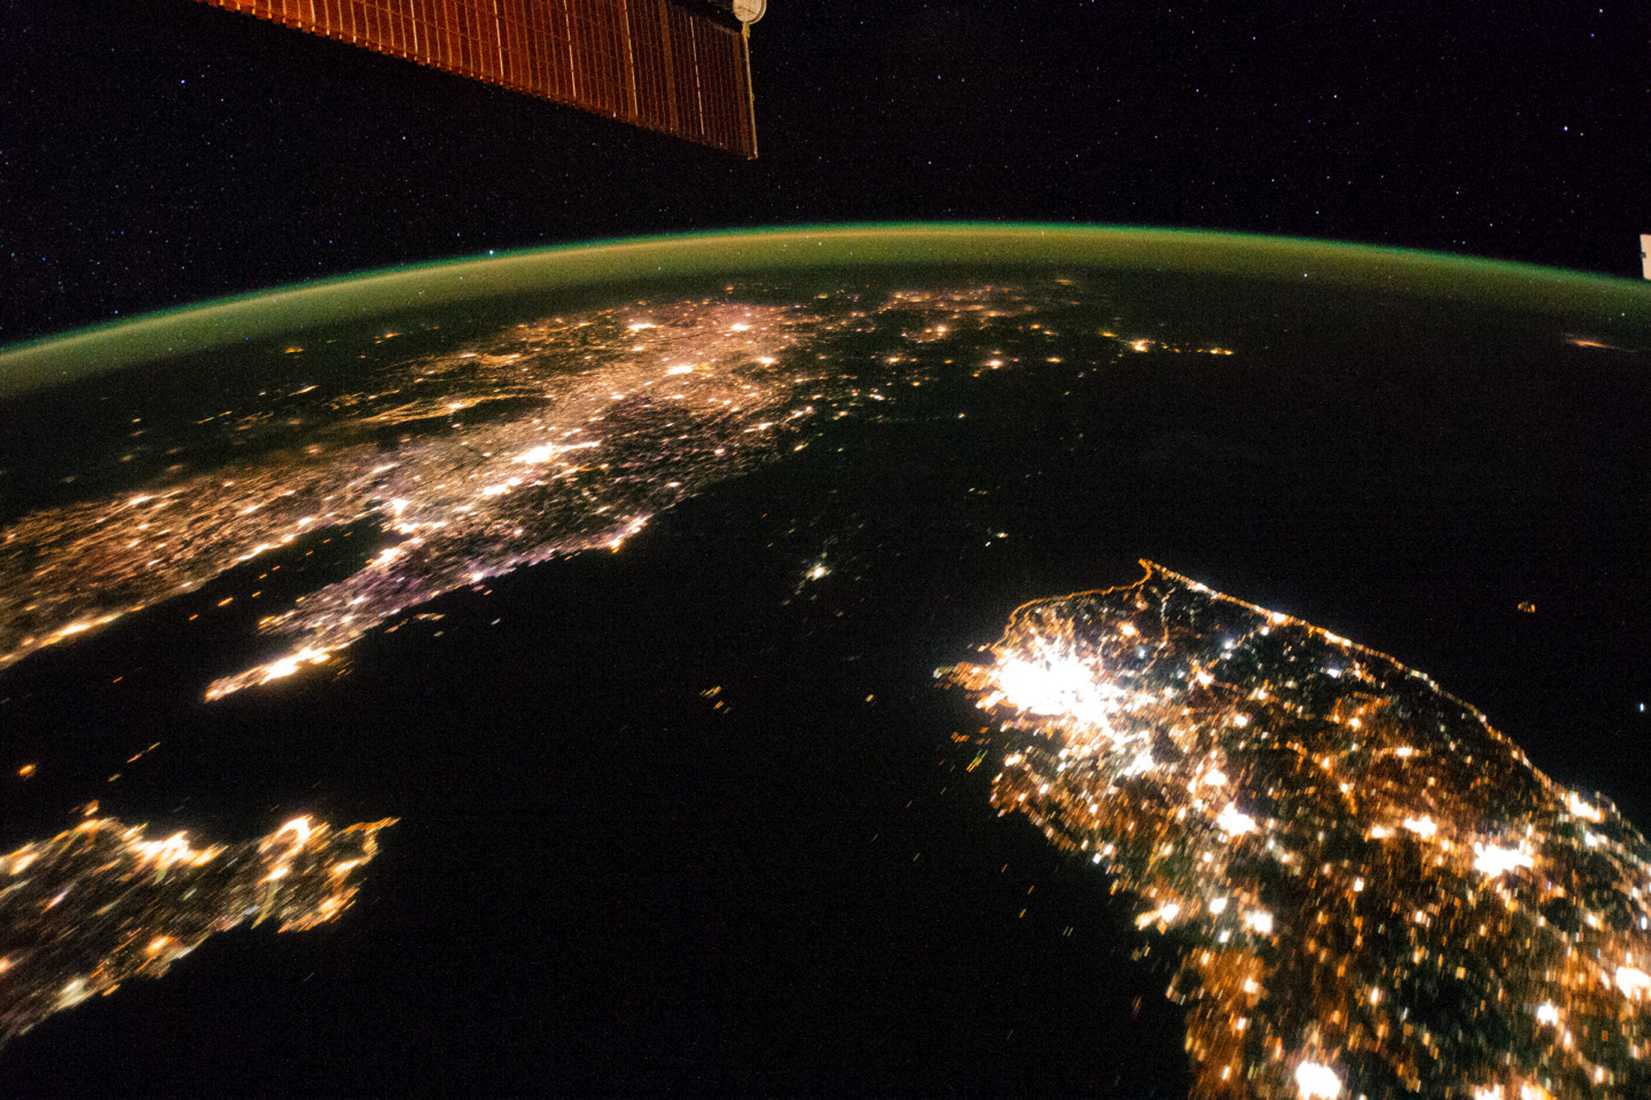 A NASA image released on February 24, 2014 shows a photo taken by the Expedition 38 crew aboard the International Space Station on January 30, 2014 of the night view of the Korean Peninsula.